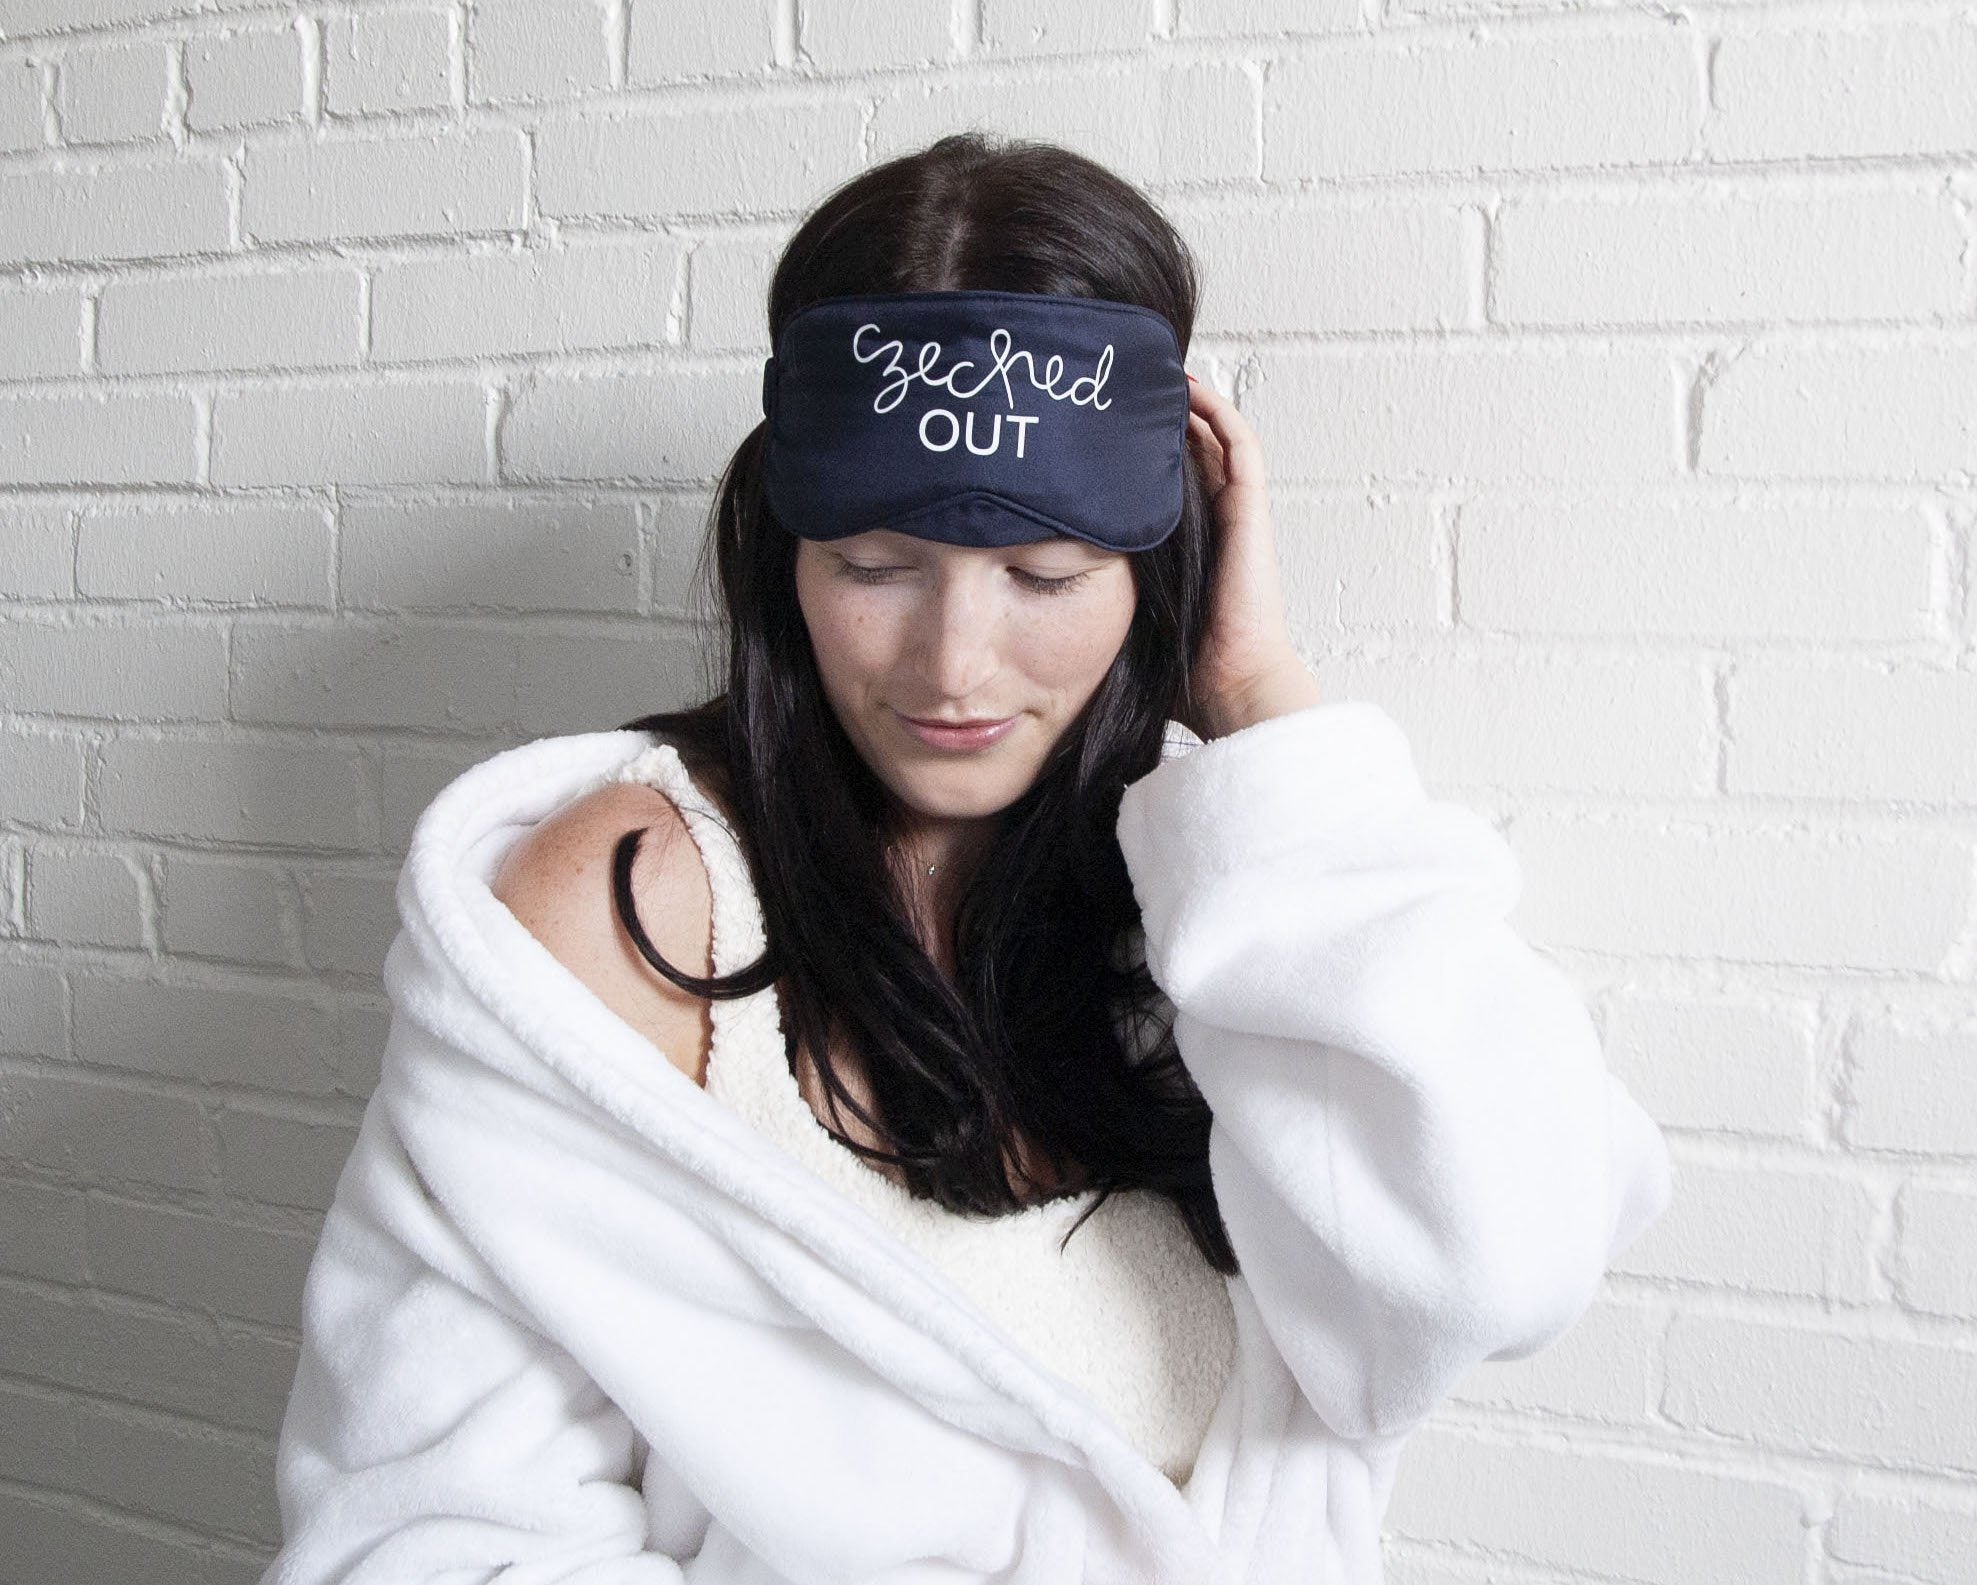 The Limited-Edition 'Czeched Out' Sleep Mask